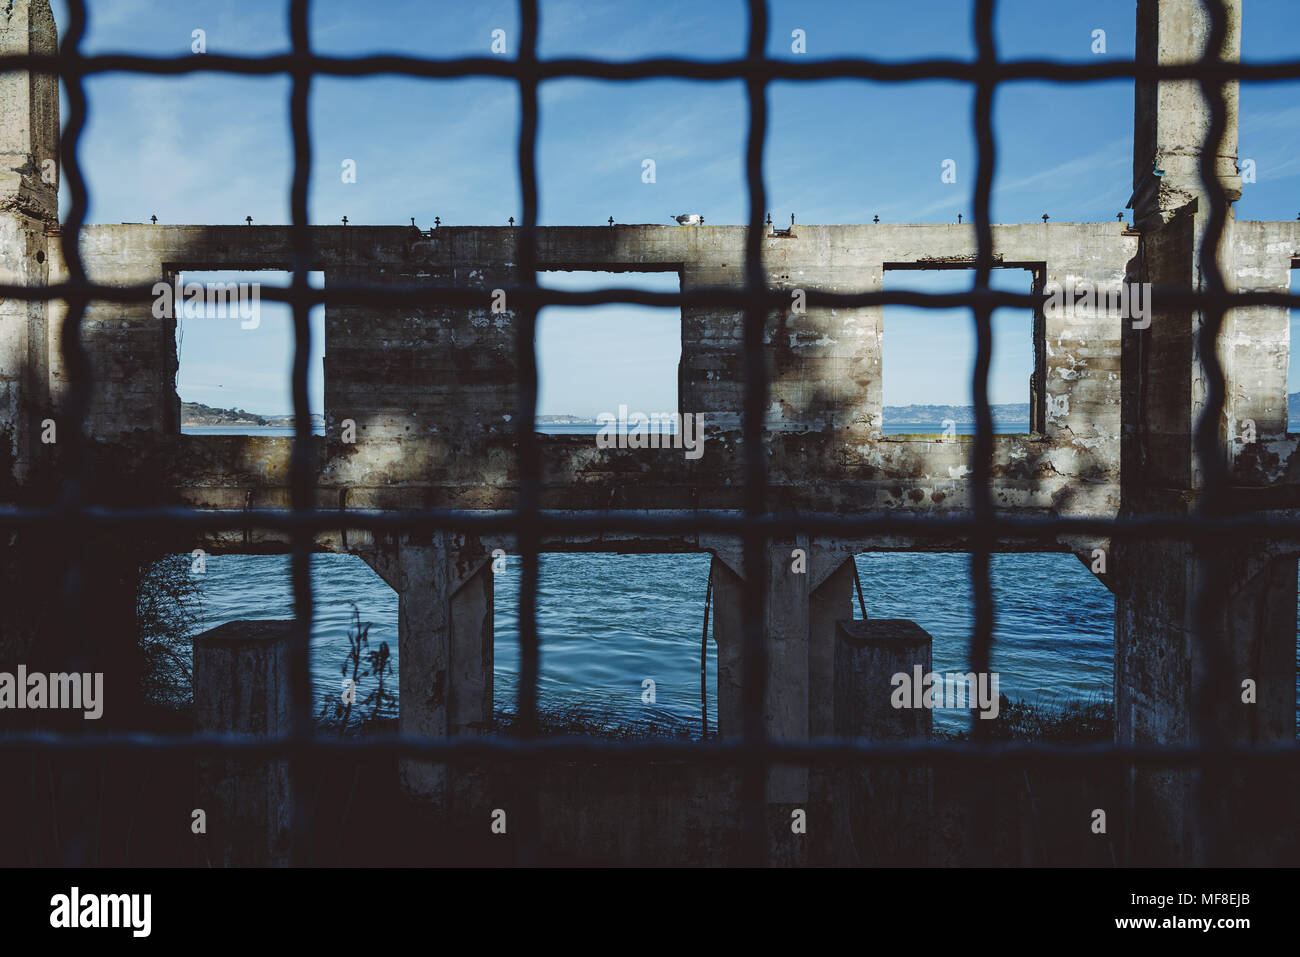 The ruins of a building on Alcatraz Island seen through a wire mesh Stock Photo